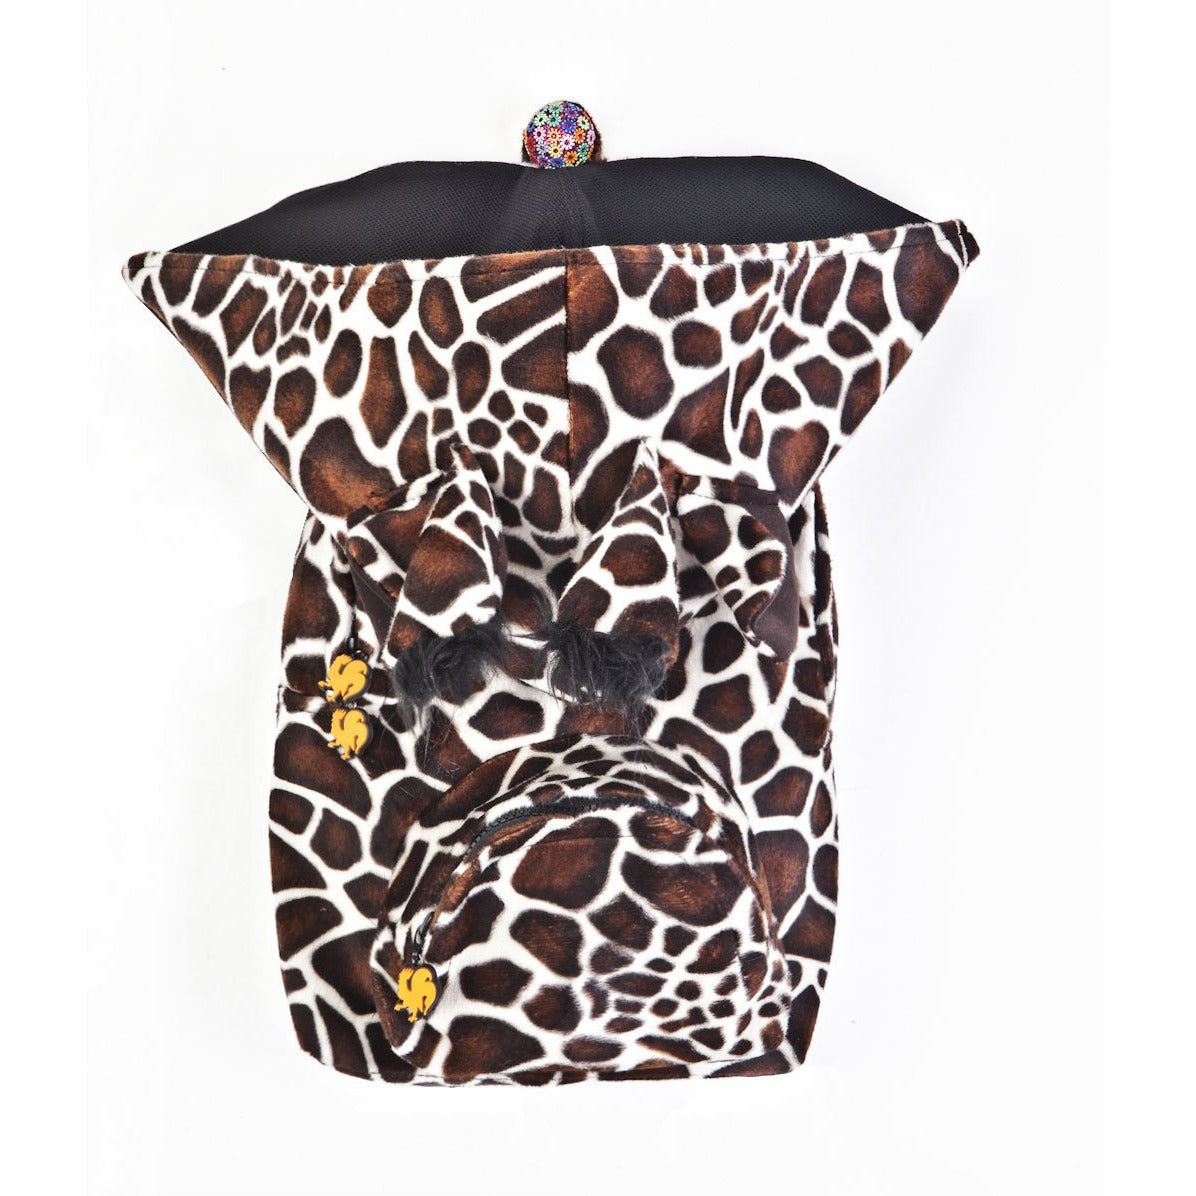 Giraffe - Backpack with Detachable Hood - Water-repellent - Large Size